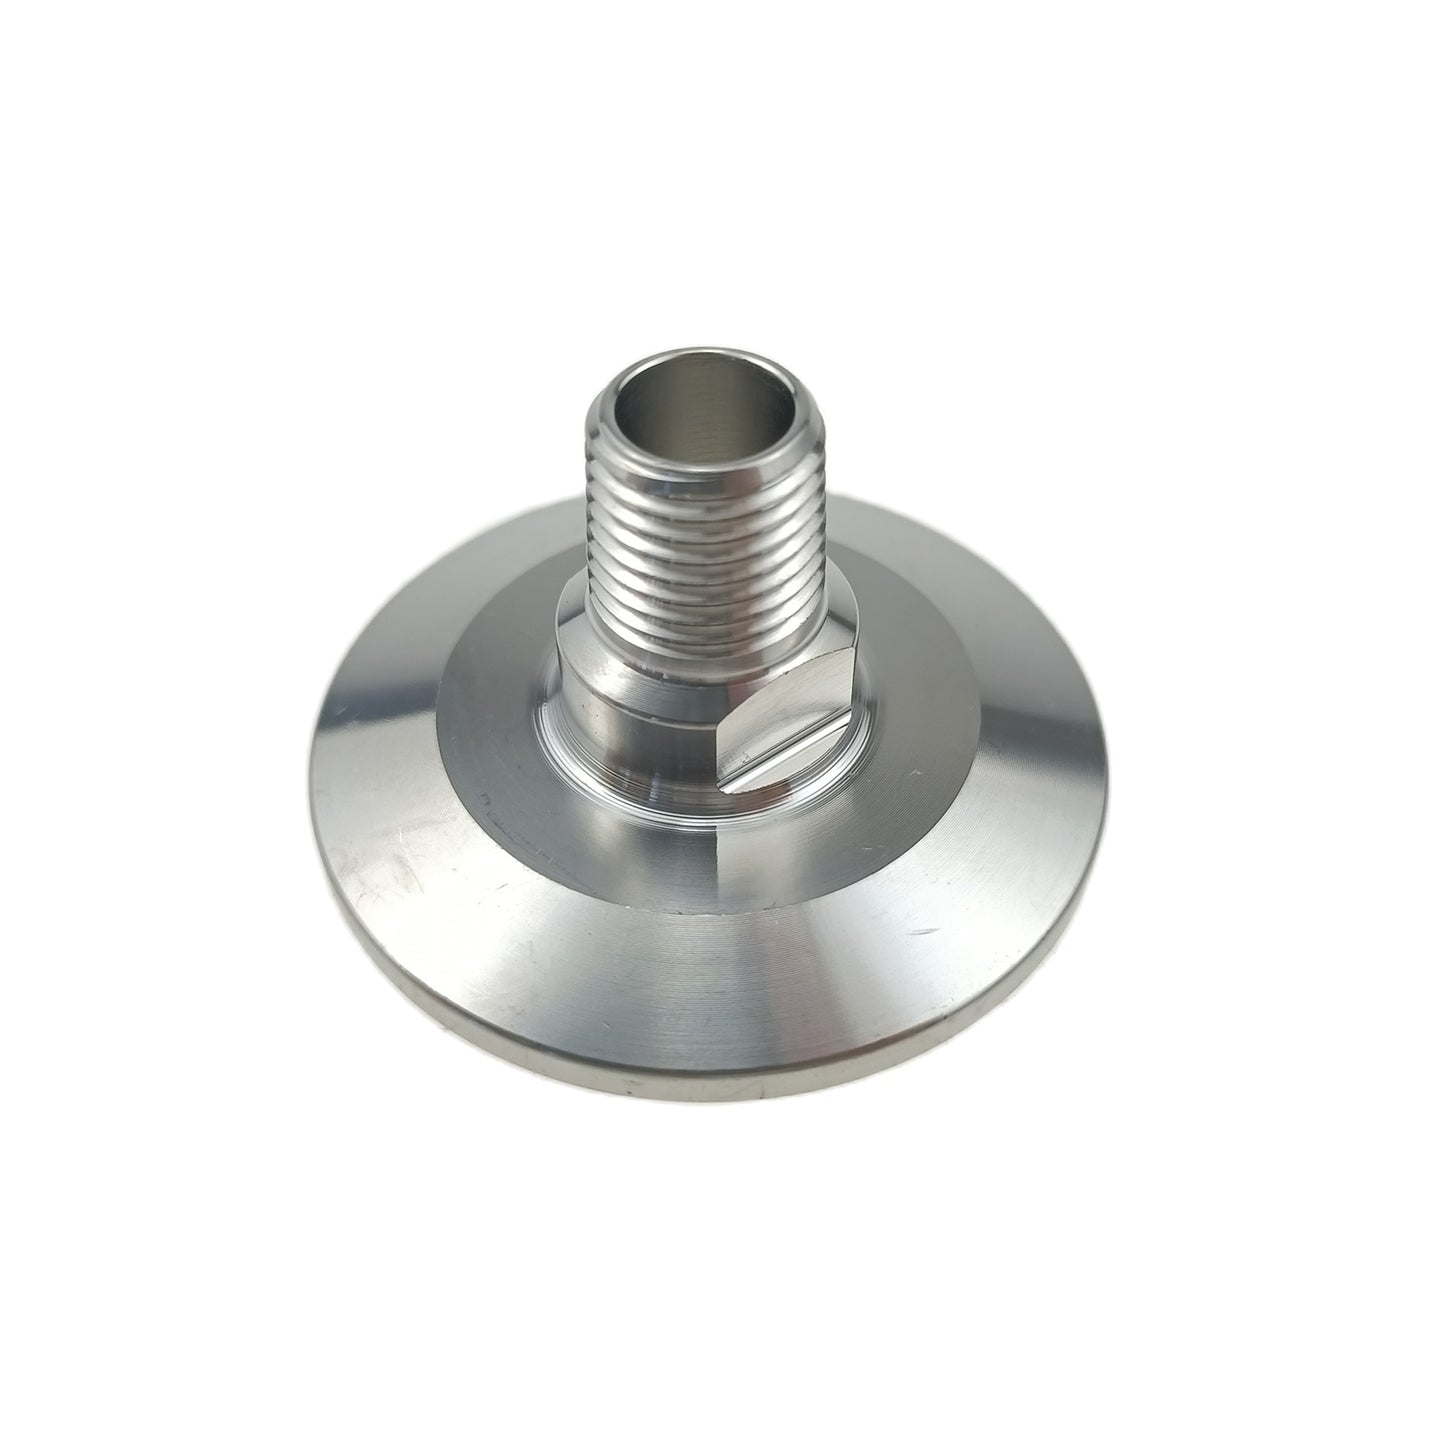 Food Grade 1/4" MNPT to 1.5" Tri Clamp Adapter SS316L Stainless Steel